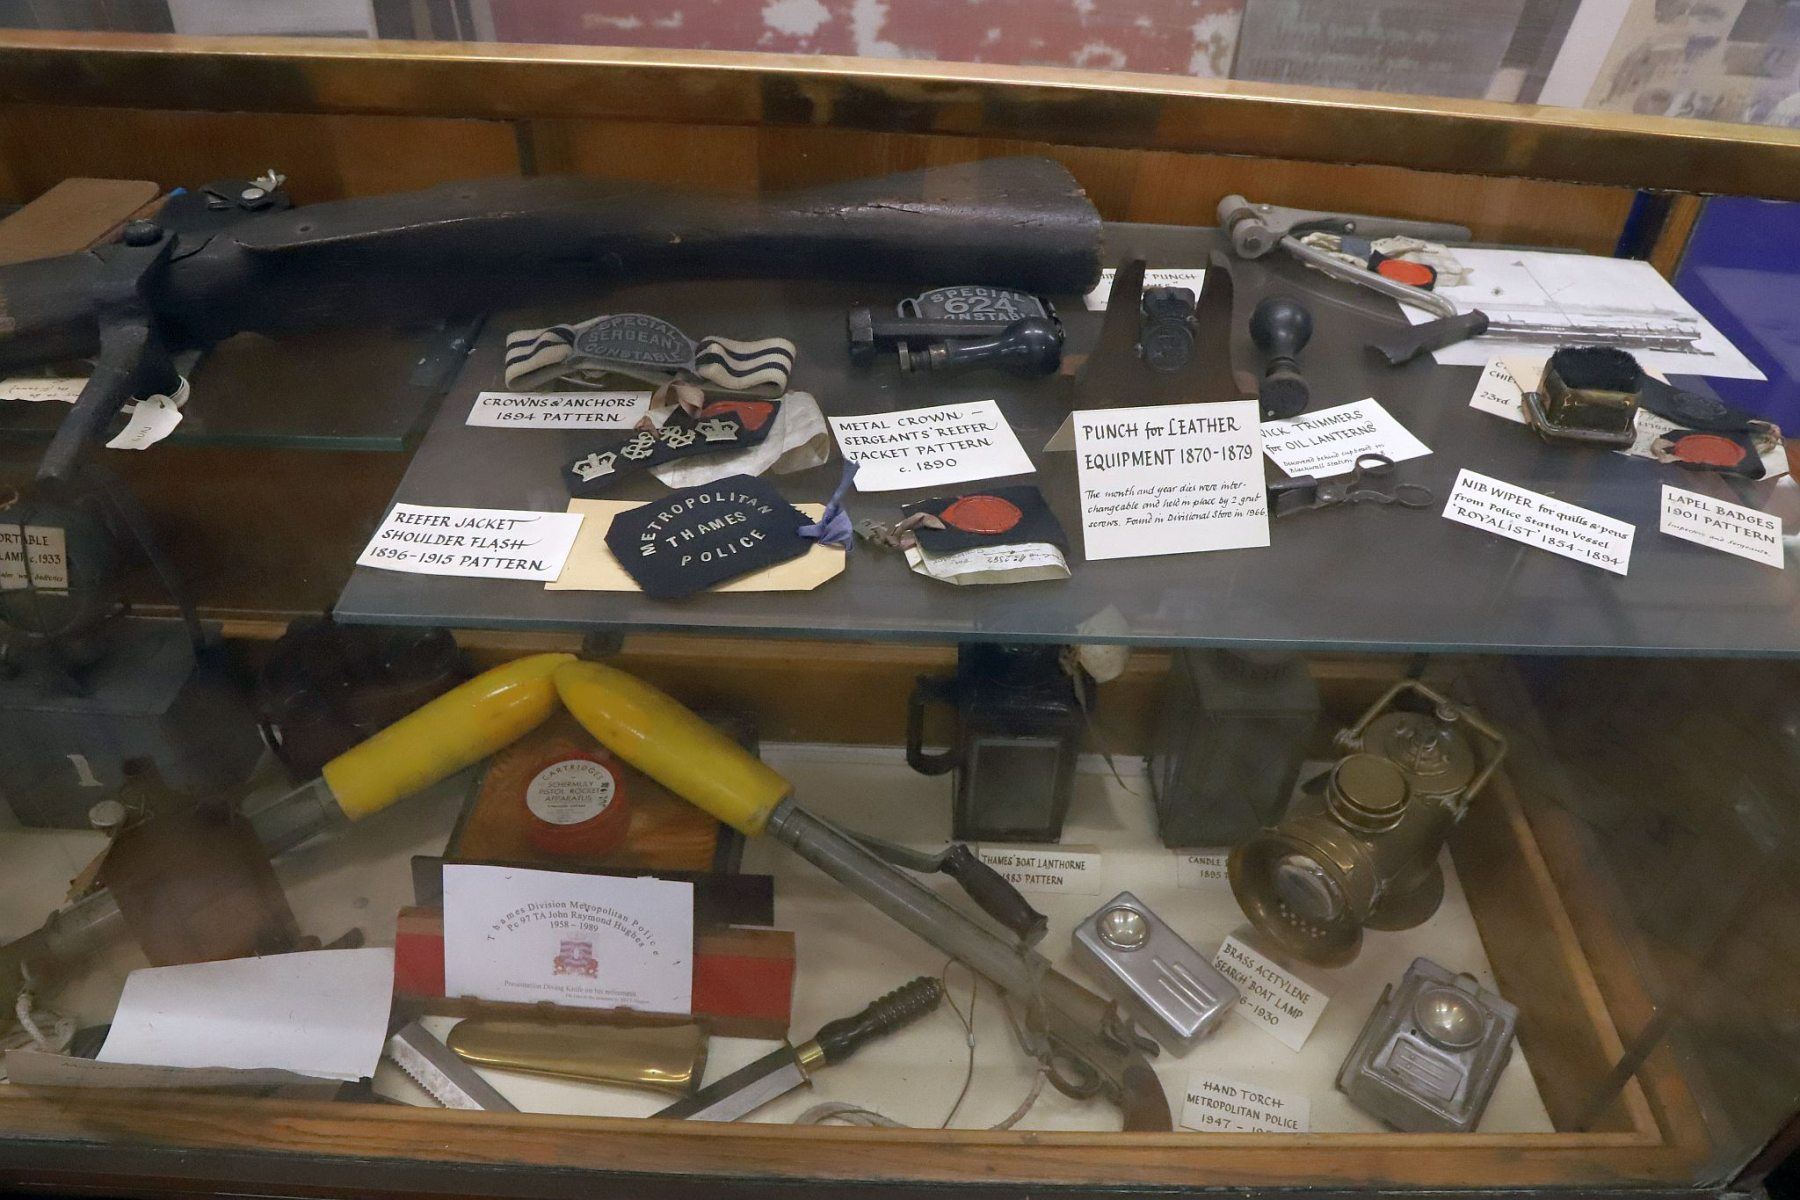 Cabinet of artefacts at the Metropolitan Police Marine Policing Unit Museum, River Thames, London.